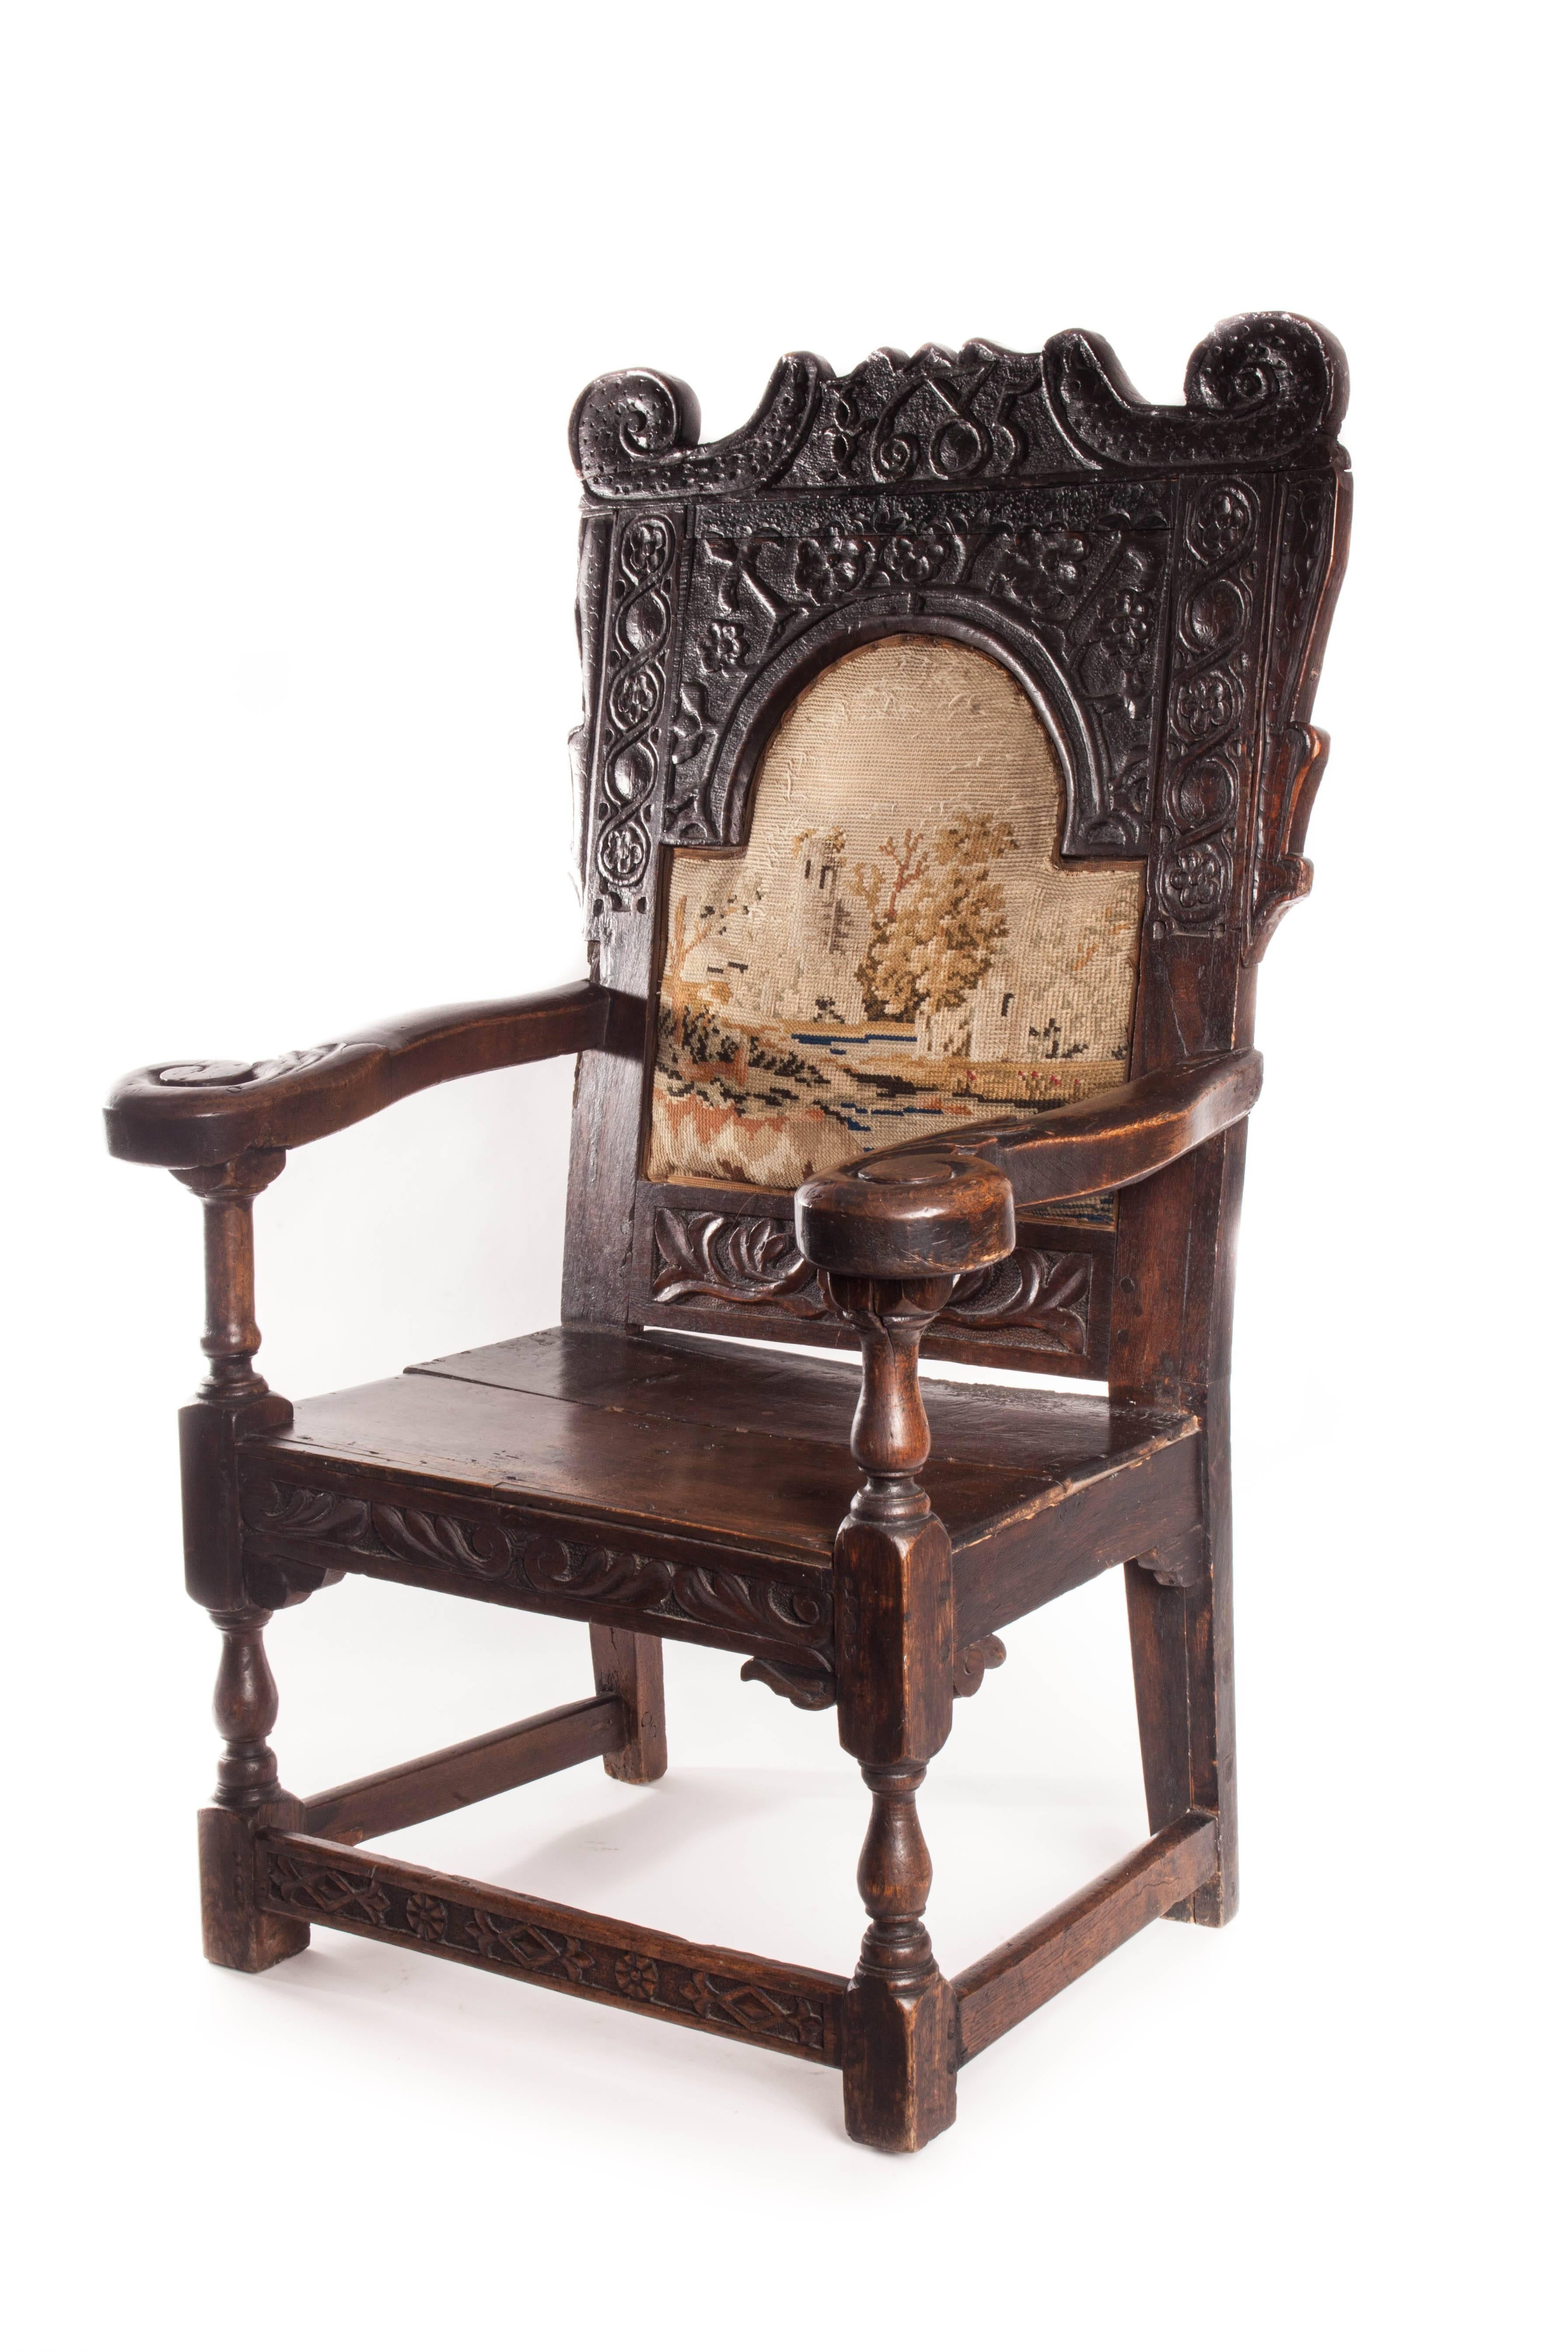 Beautiful 17th century English Jacobean armchair. Carved floral motifs and inset tapestry back. Date is carved into the back head rest. 1685.